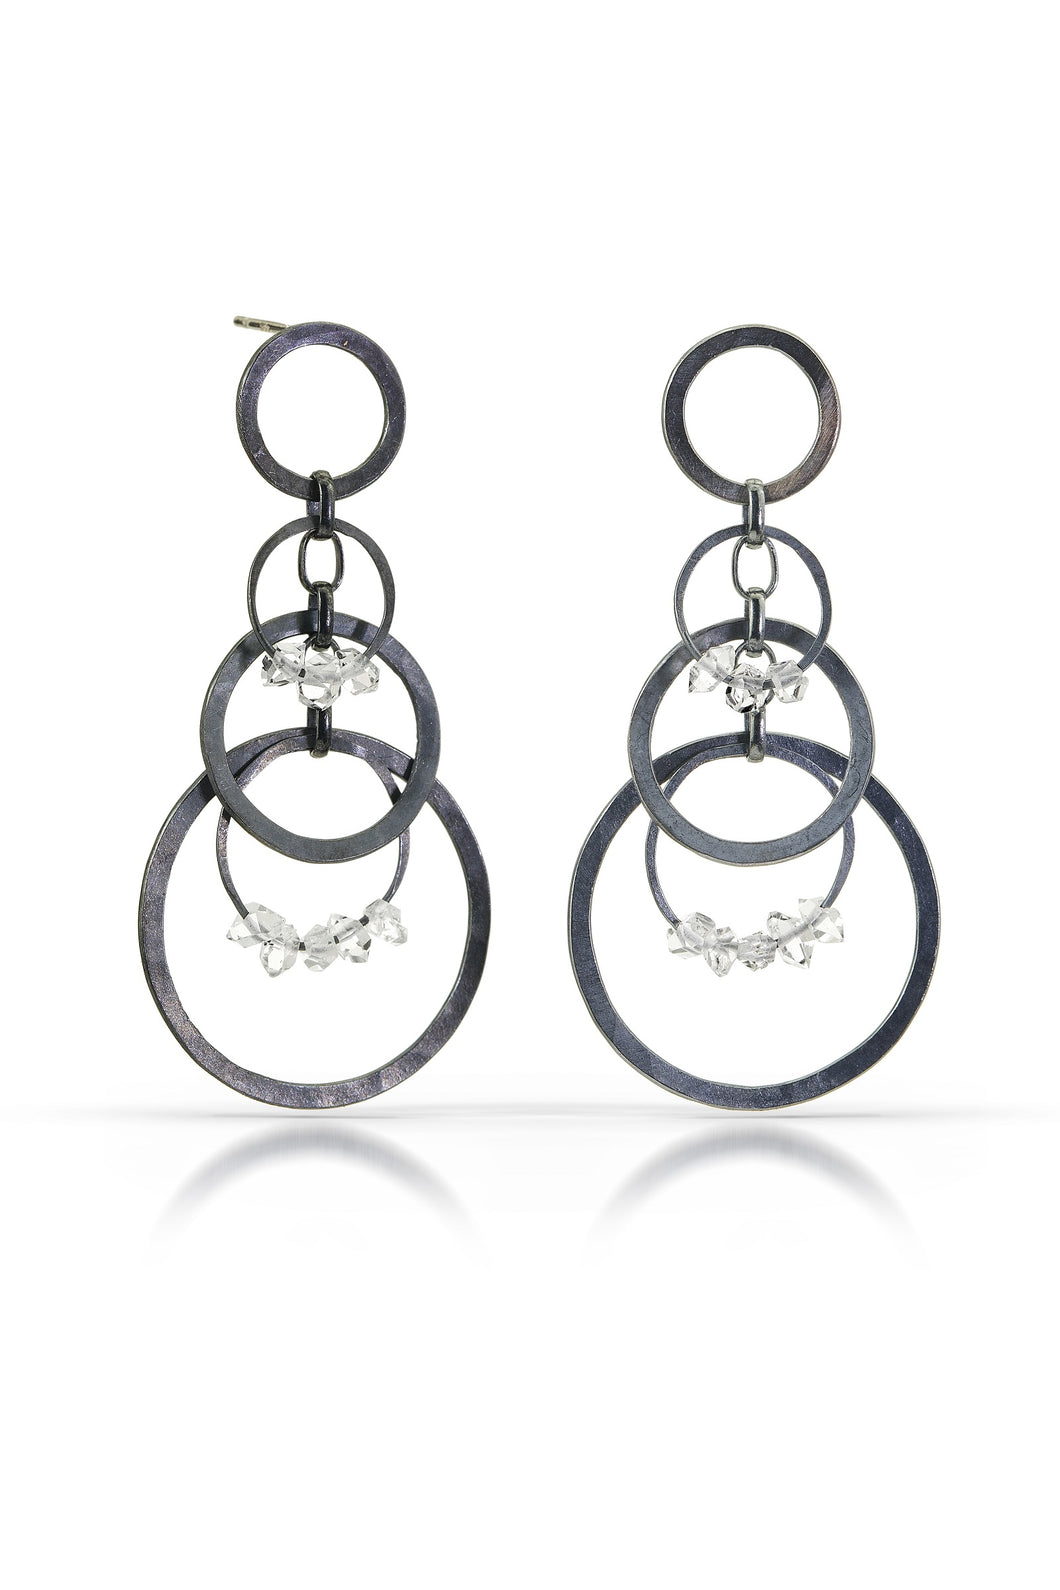 Small Circle Bunches Earrings with Oxidized Silver and Herkimer